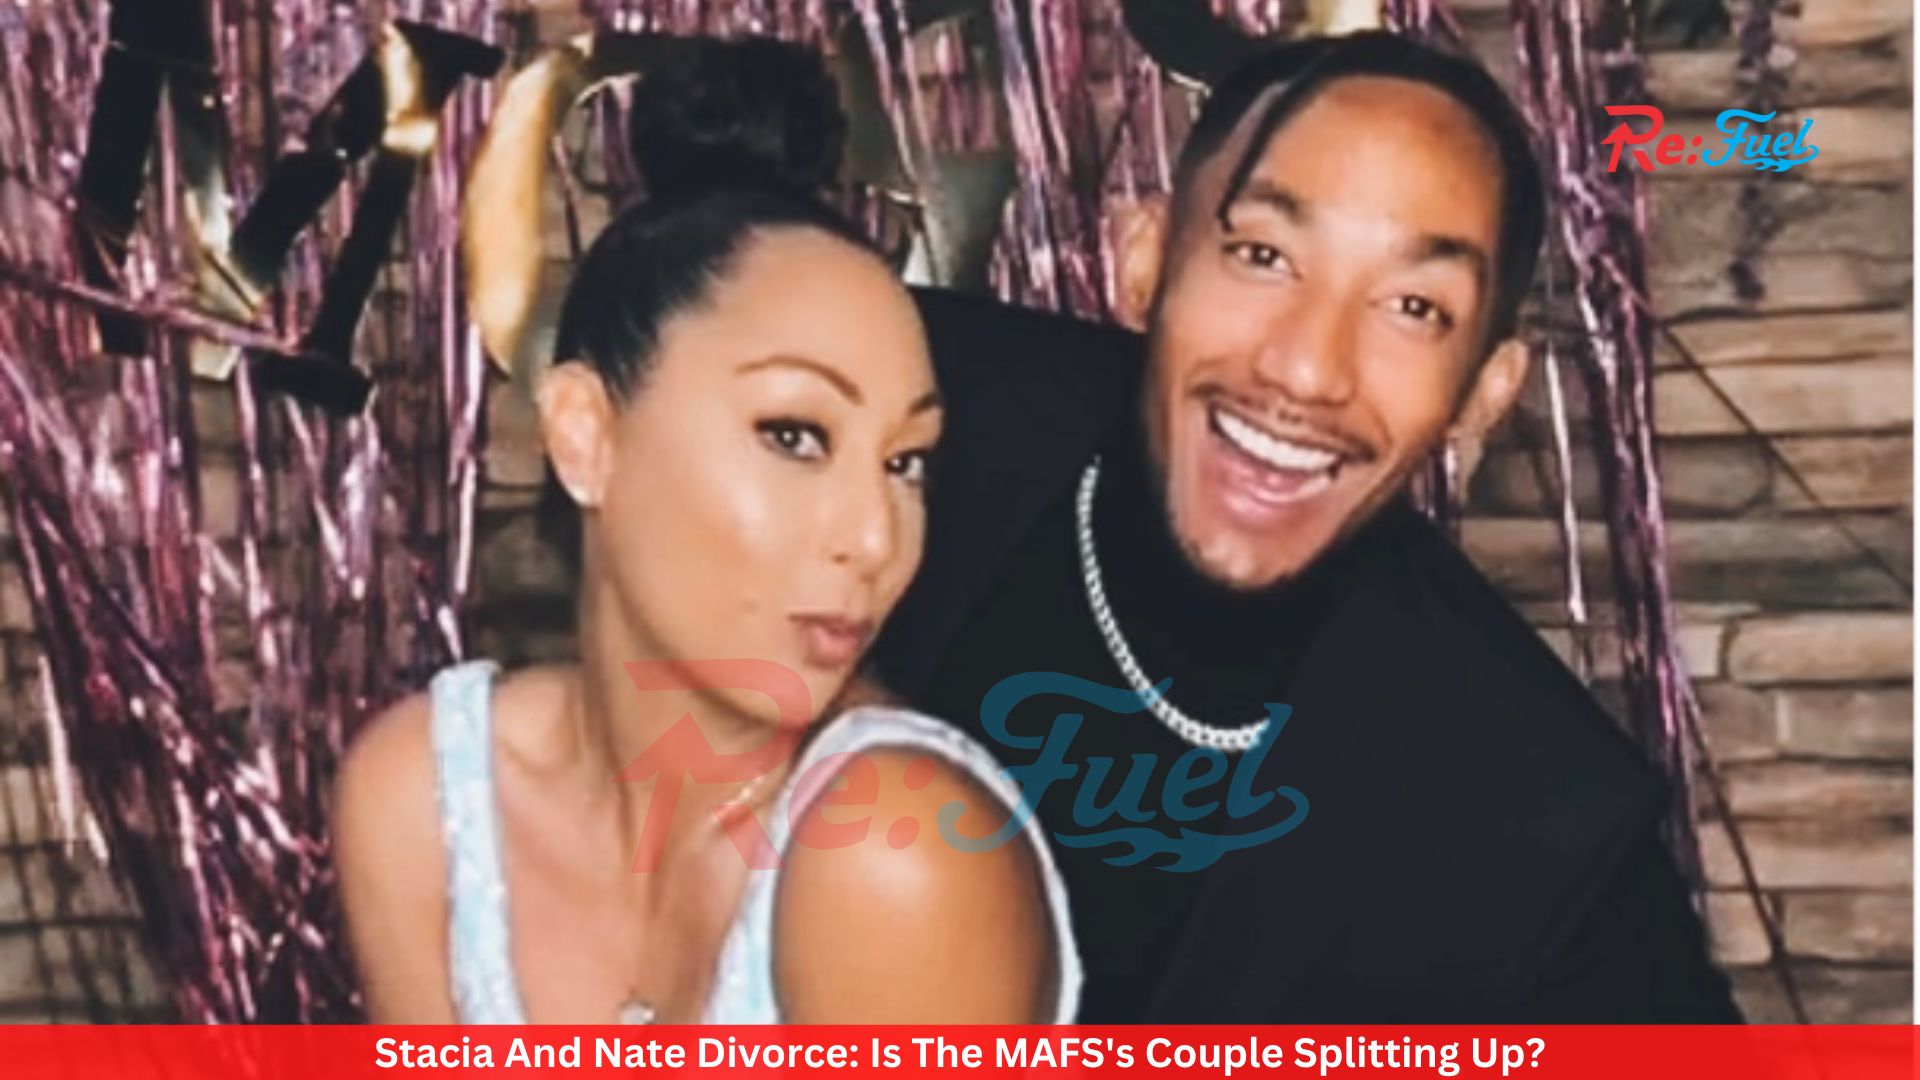 Stacia And Nate Divorce: Is The MAFS's Couple Splitting Up?